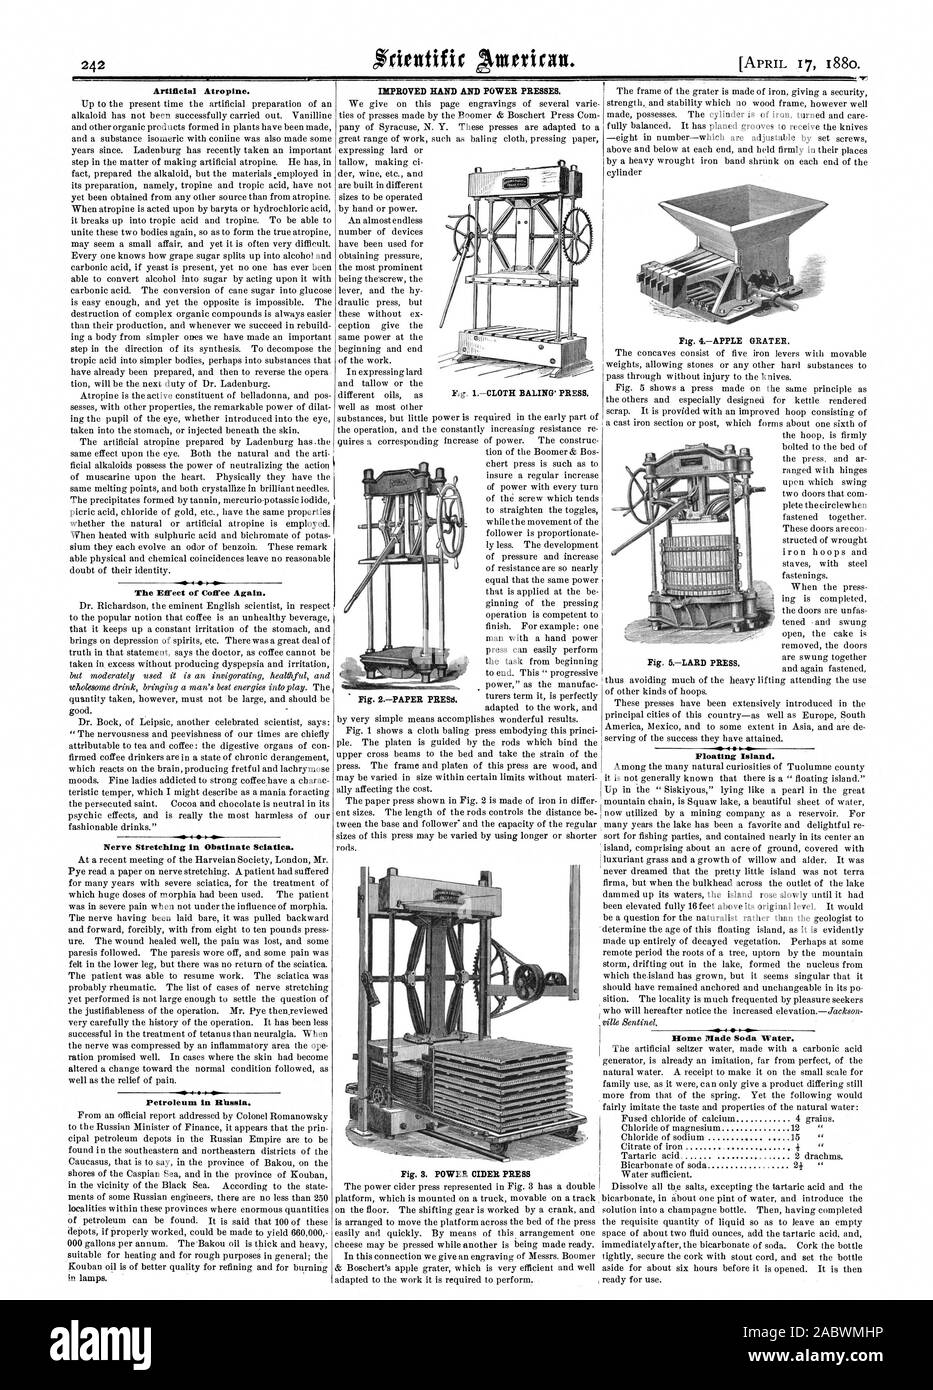 Artificial Atropine. The Effect of Coffee Again. 40 4  Nerve Stretching in Obstinate Sciatica. Petroleum in Wass's. IMPROVED HAND AND POWER PRESSES. Fig. S. POWER CIDER PRESS Floating Island. Fig ICLOTH BALING' PRESS. Fig. 2PAPER PRESS. Home Made Soda Water., scientific american, 1880-04-17 Stock Photo